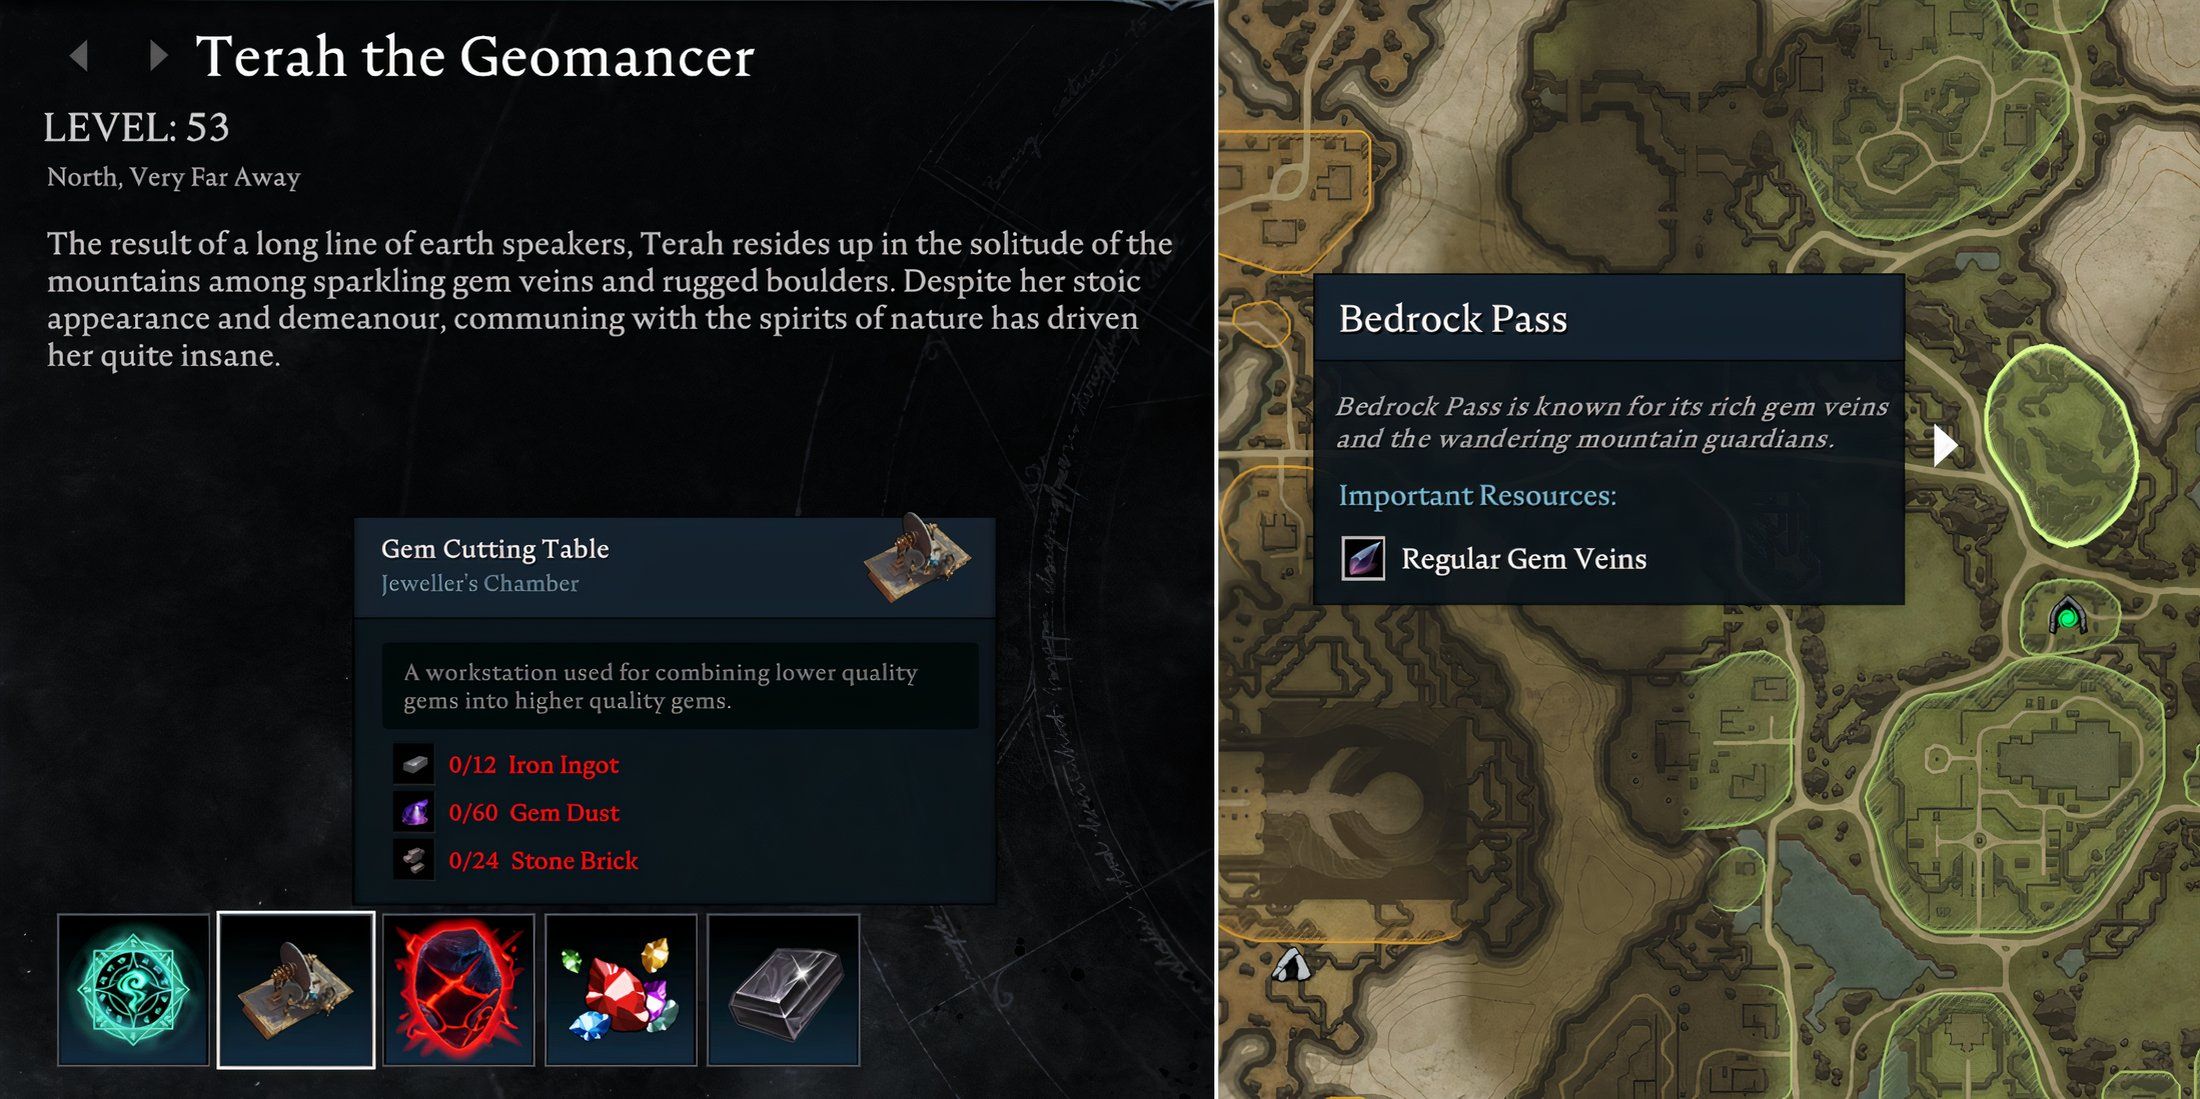 an image showing the loot and location of Thera the Geomancer